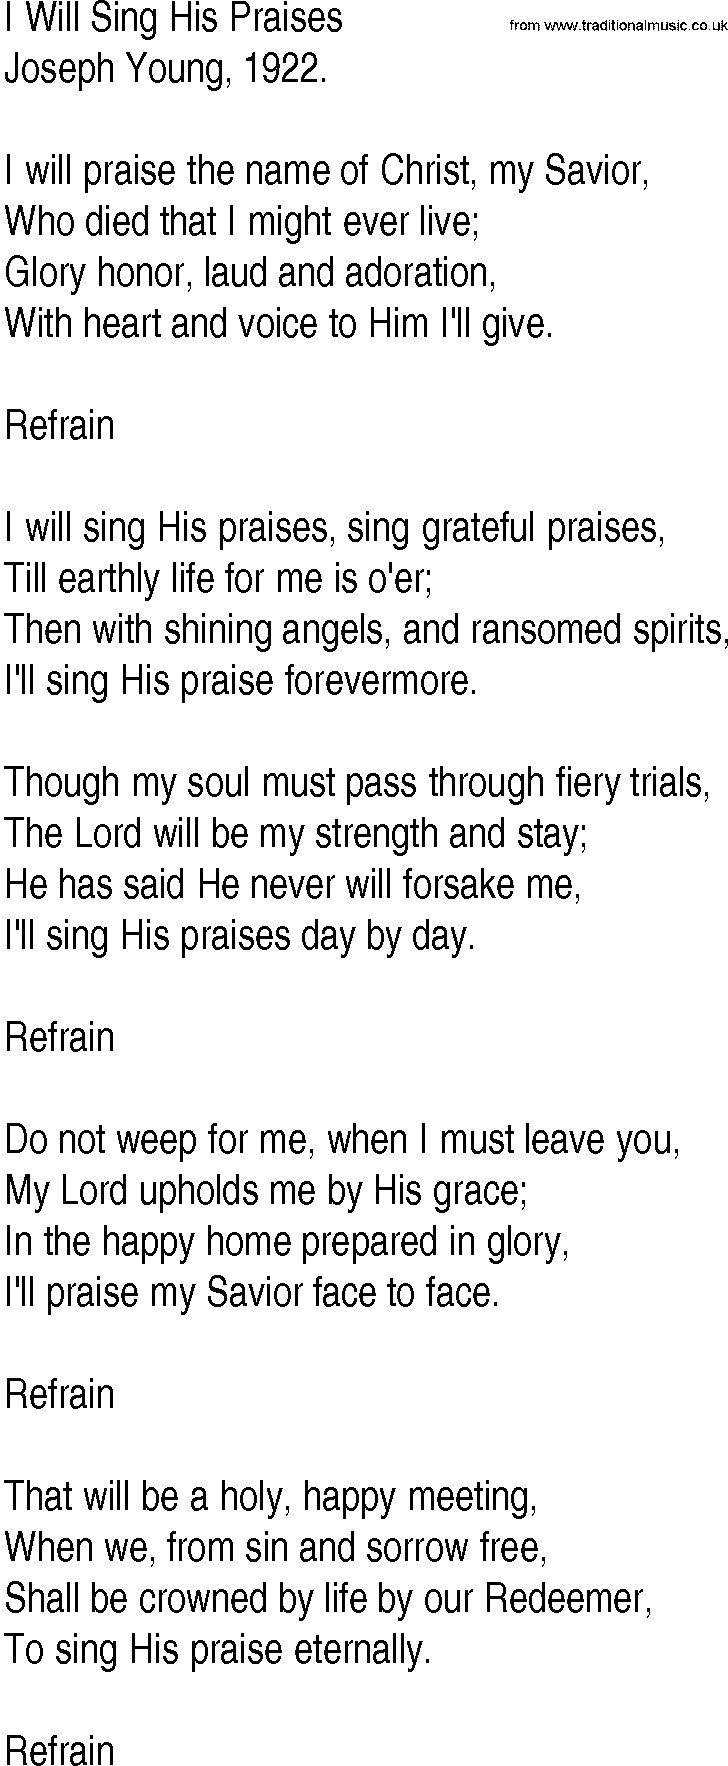 Hymn and Gospel Song: I Will Sing His Praises by Joseph Young lyrics